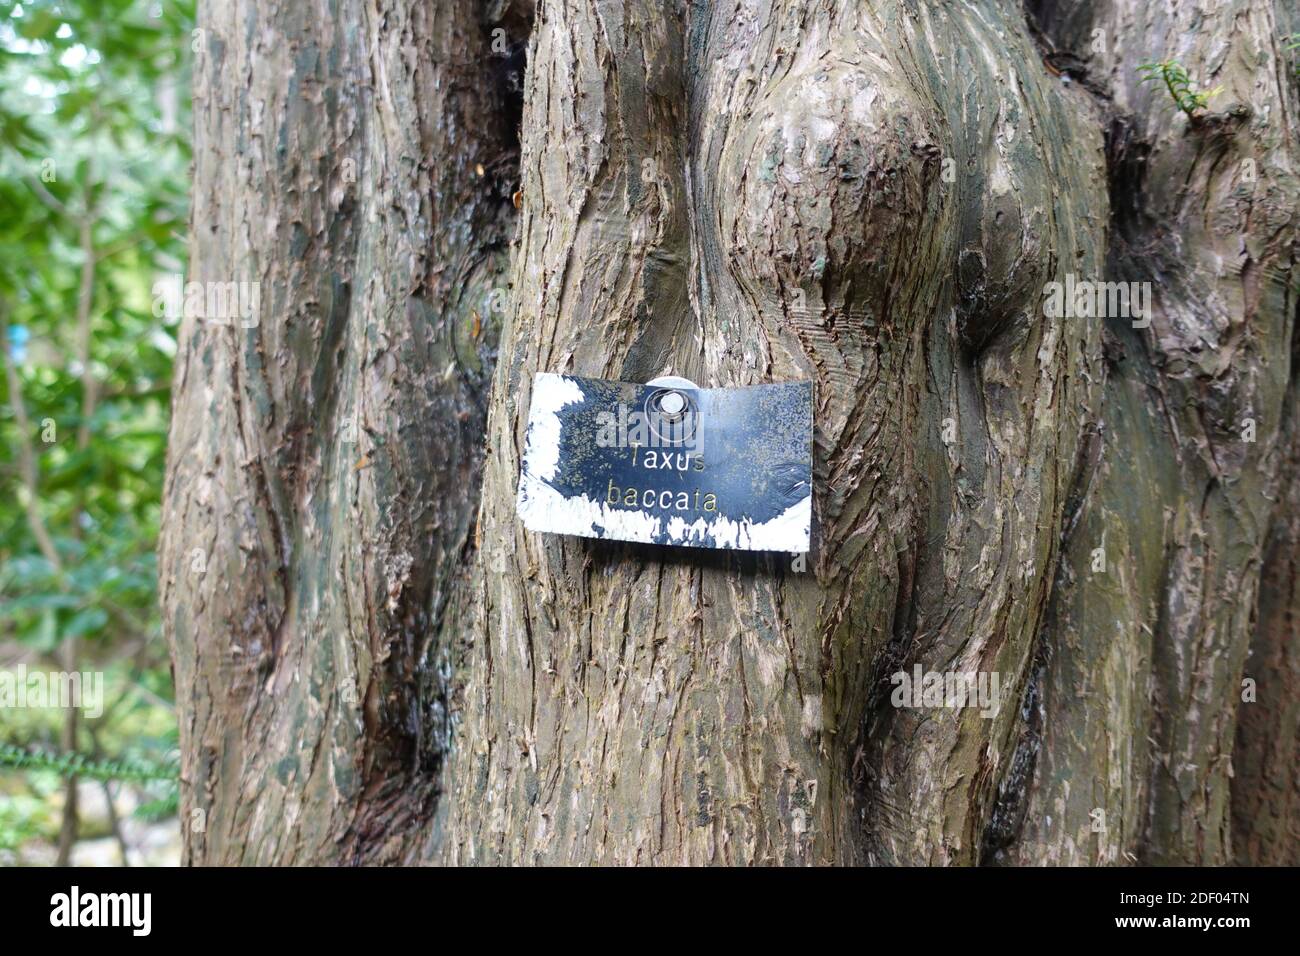 A close-up of the trunk of a common european yew tree with a 'taxus baccata' label in Bodnant Garden, Wales. Stock Photo